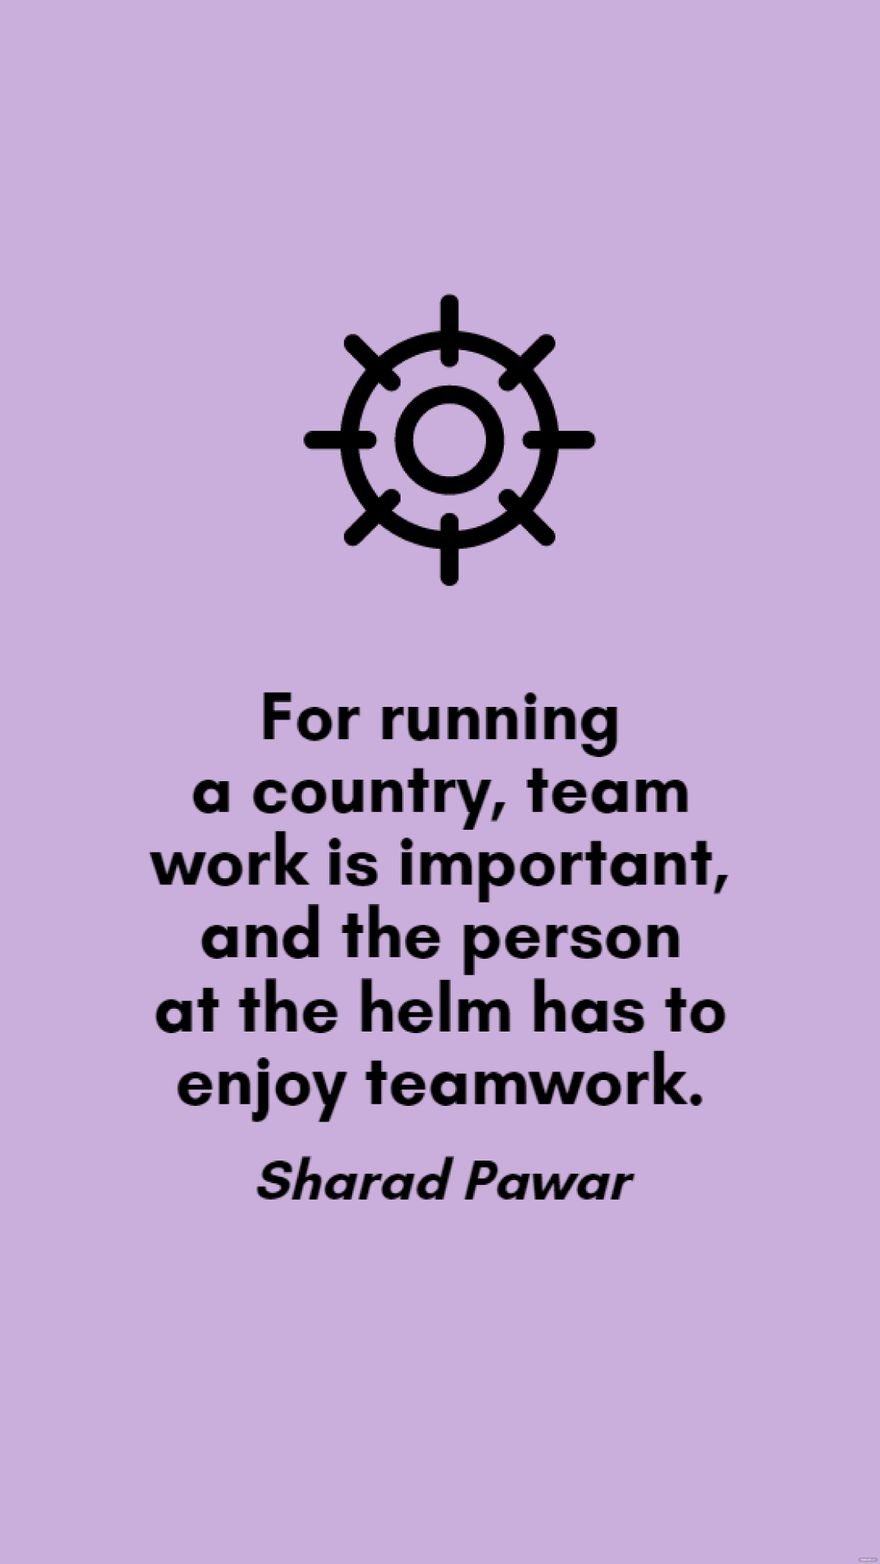 Sharad Pawar - For running a country, team work is important, and the person at the helm has to enjoy teamwork.